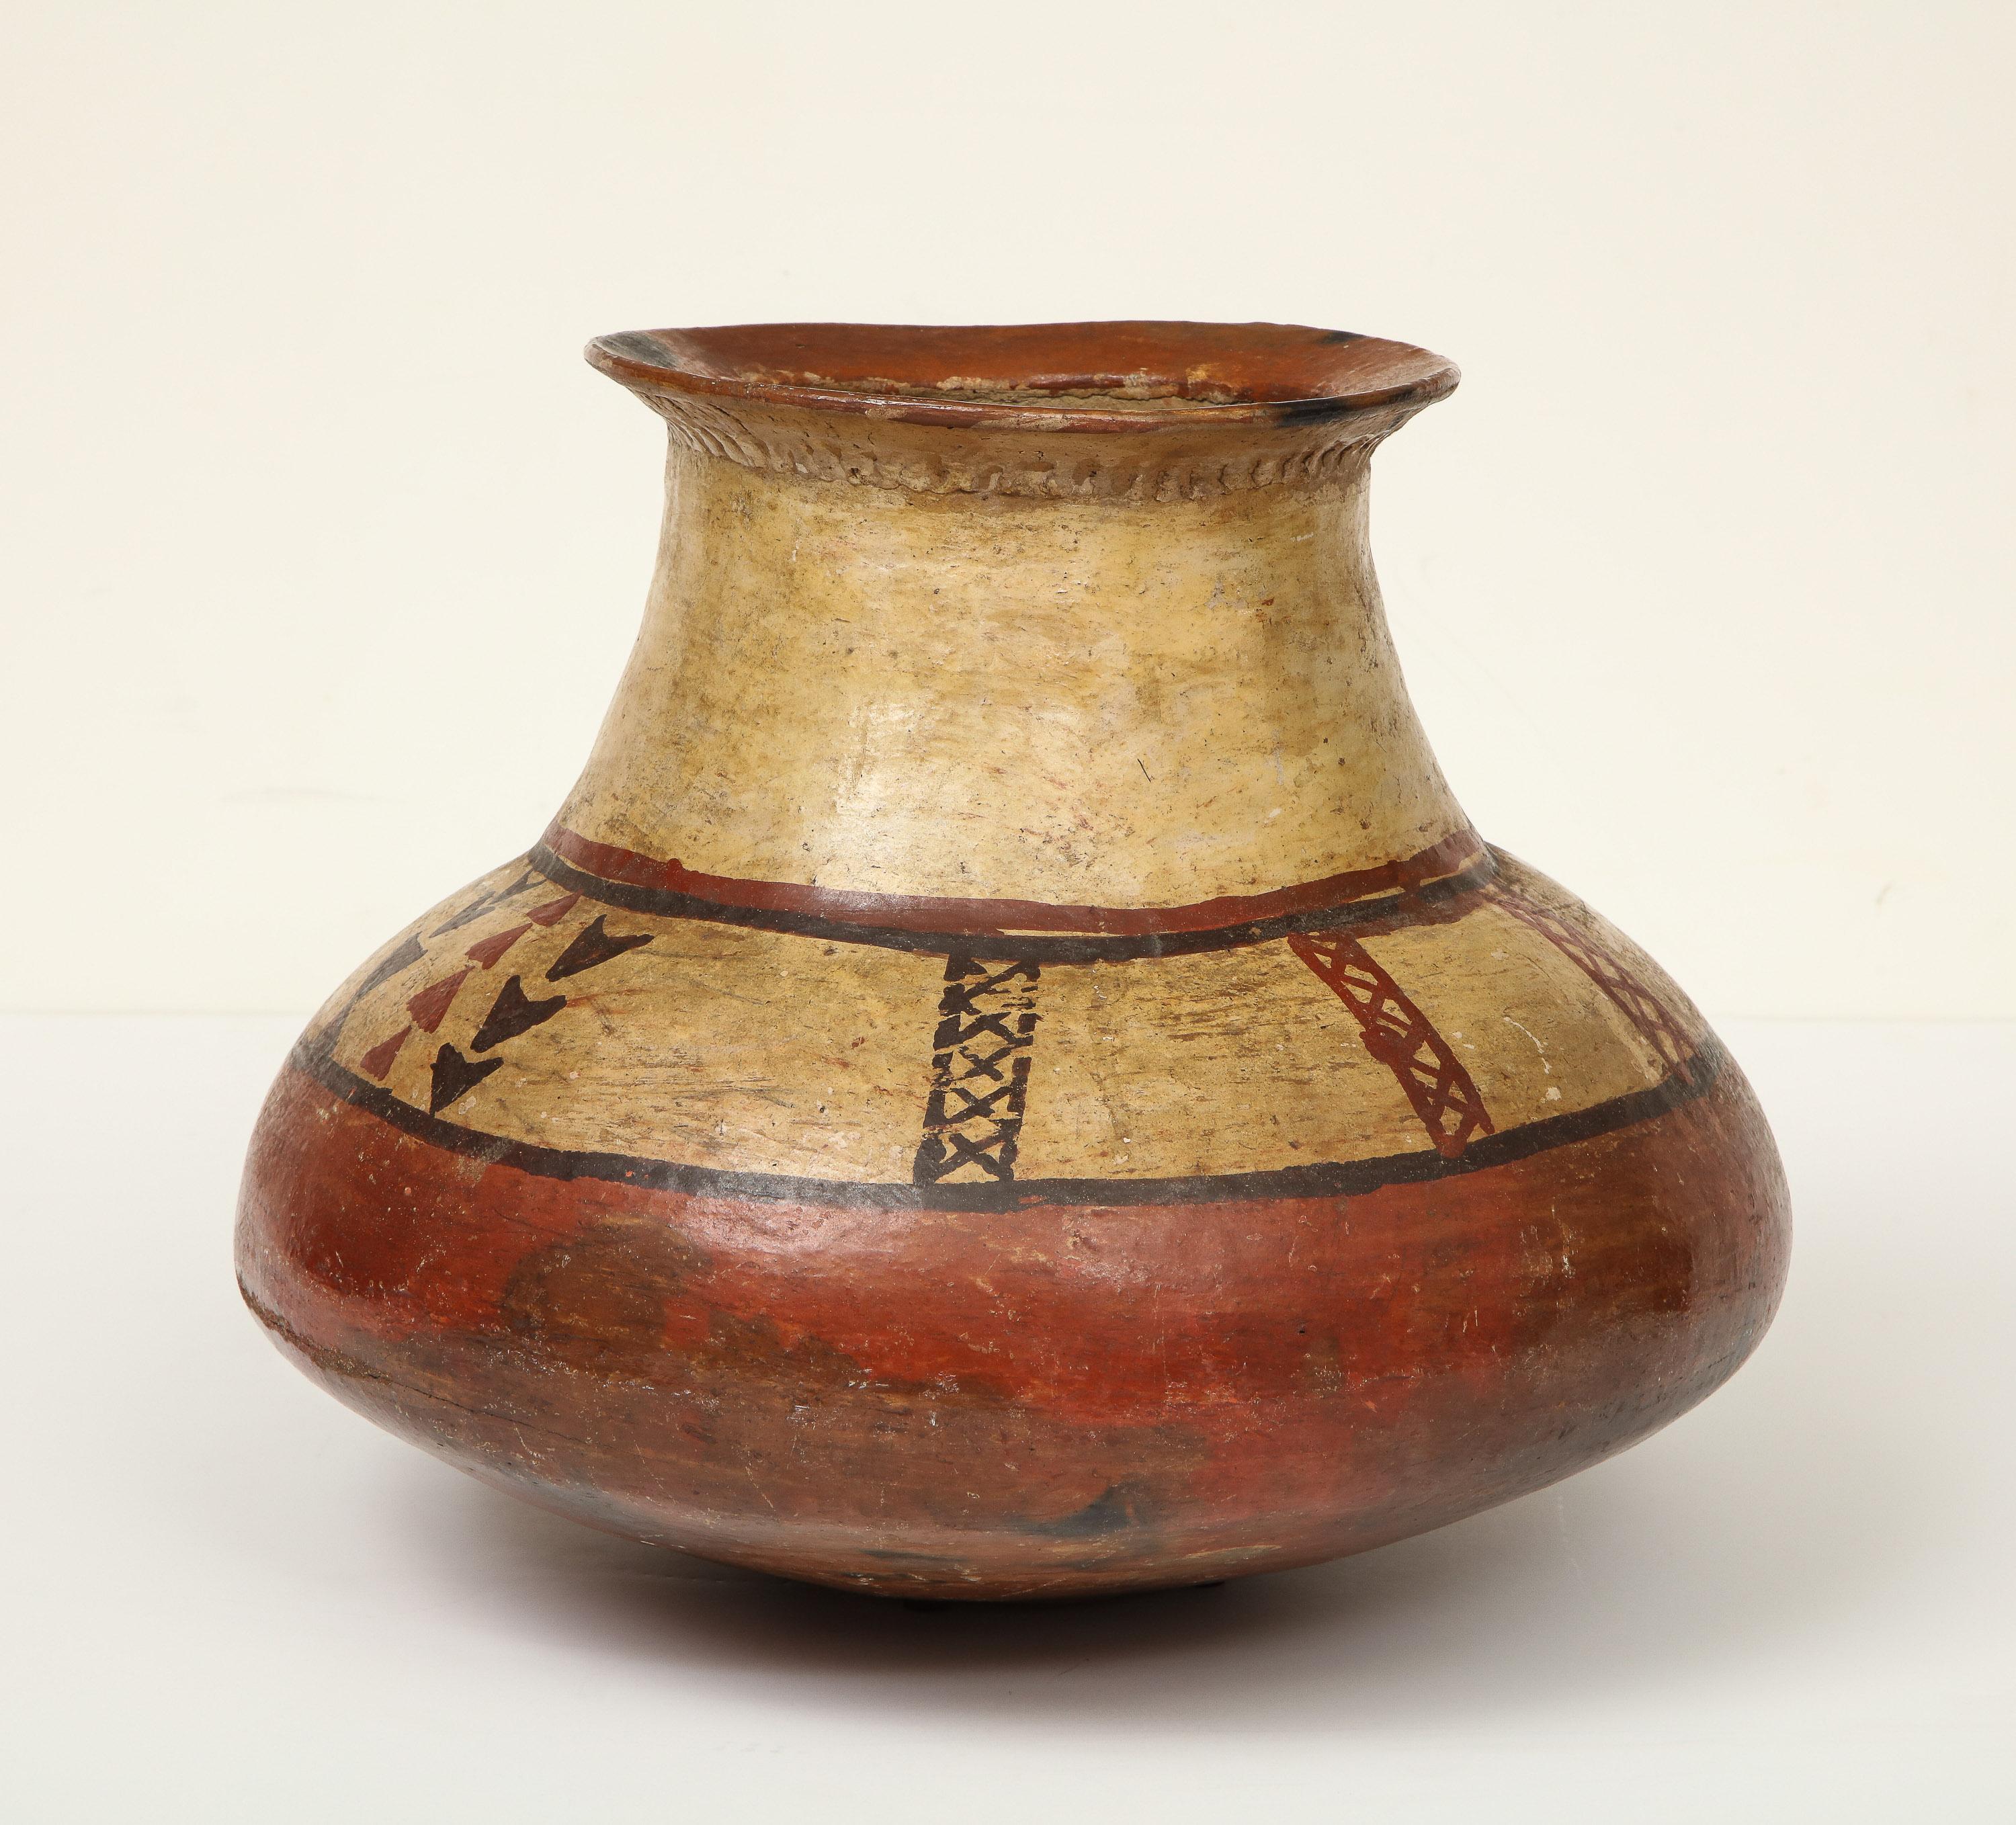 20th Century Pottery Bowl from the Andes